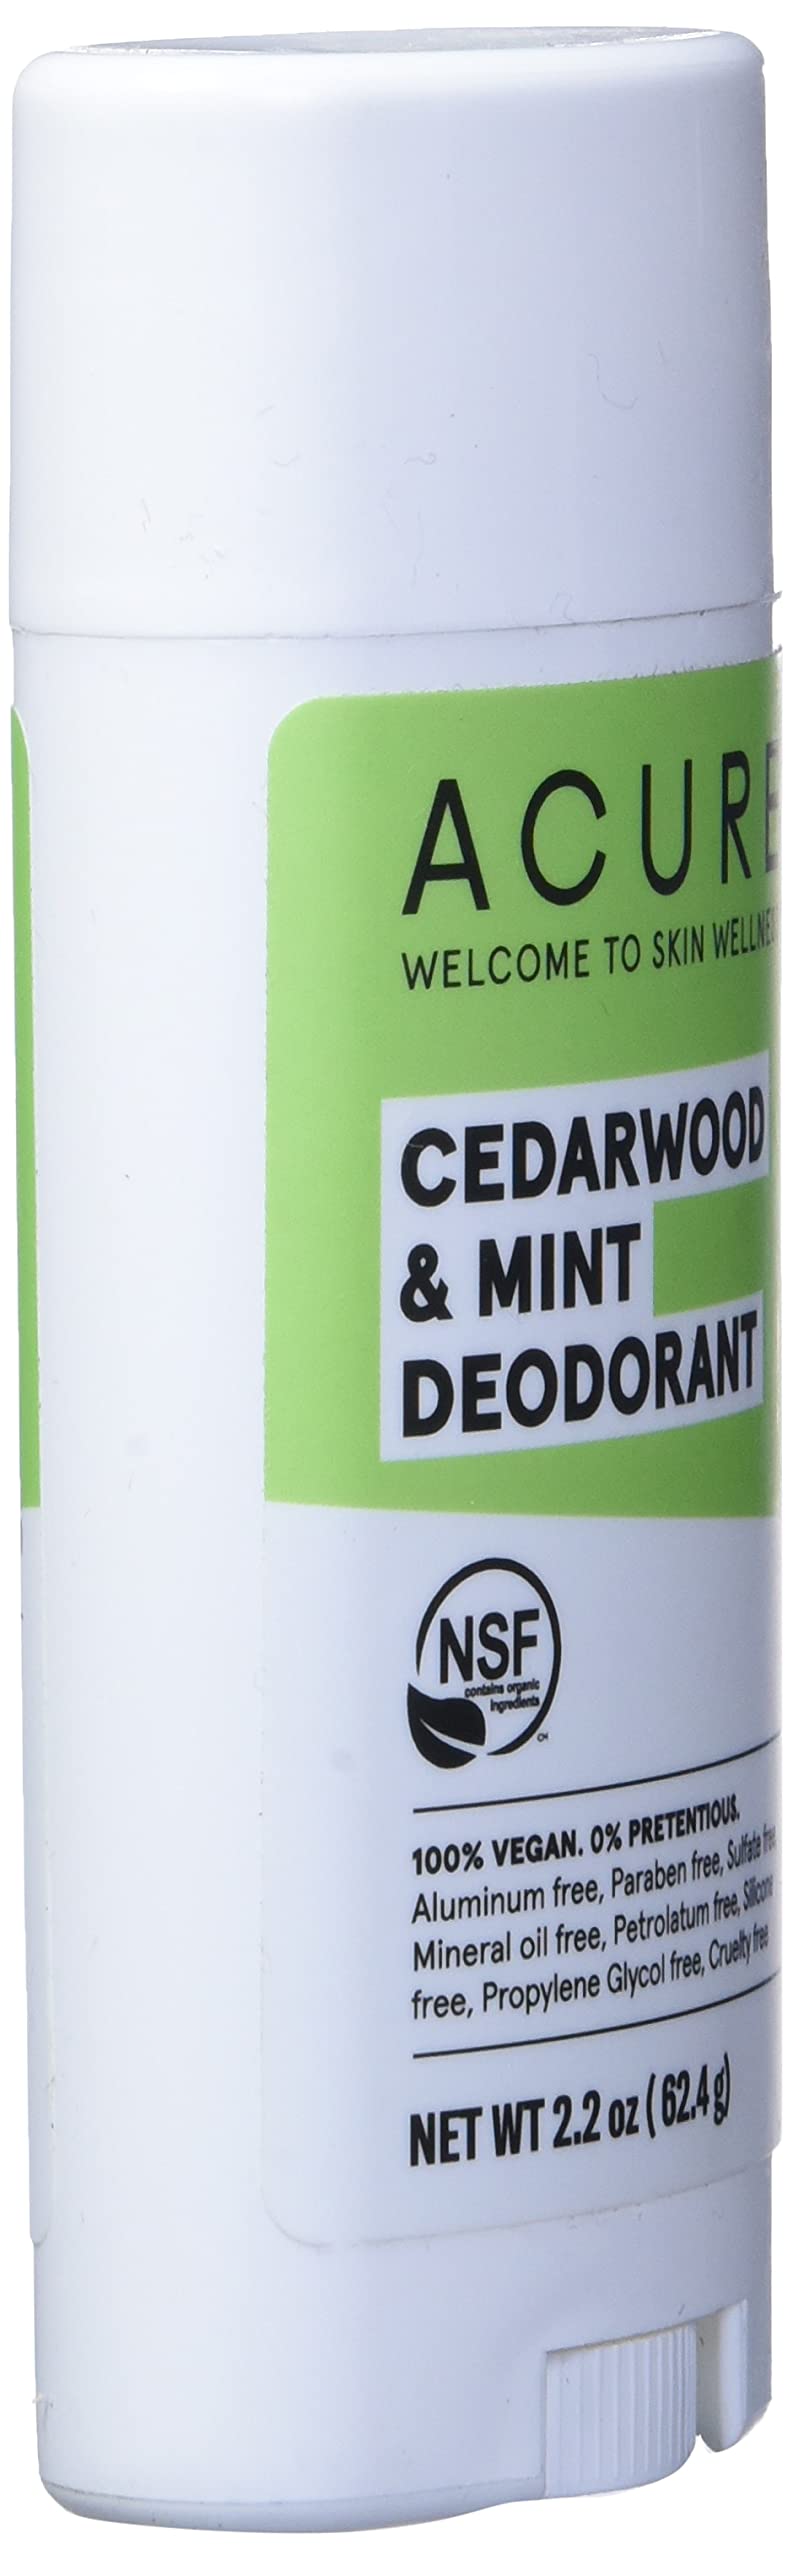 [Australia] - ACURE Cedarwood & Mint Deodorant, 100% Vegan, NSF Certified - Contains Organic Ingredients, Aluminum-Free, Woodsy & Minty Finish Scent, 2.2 Ounce 